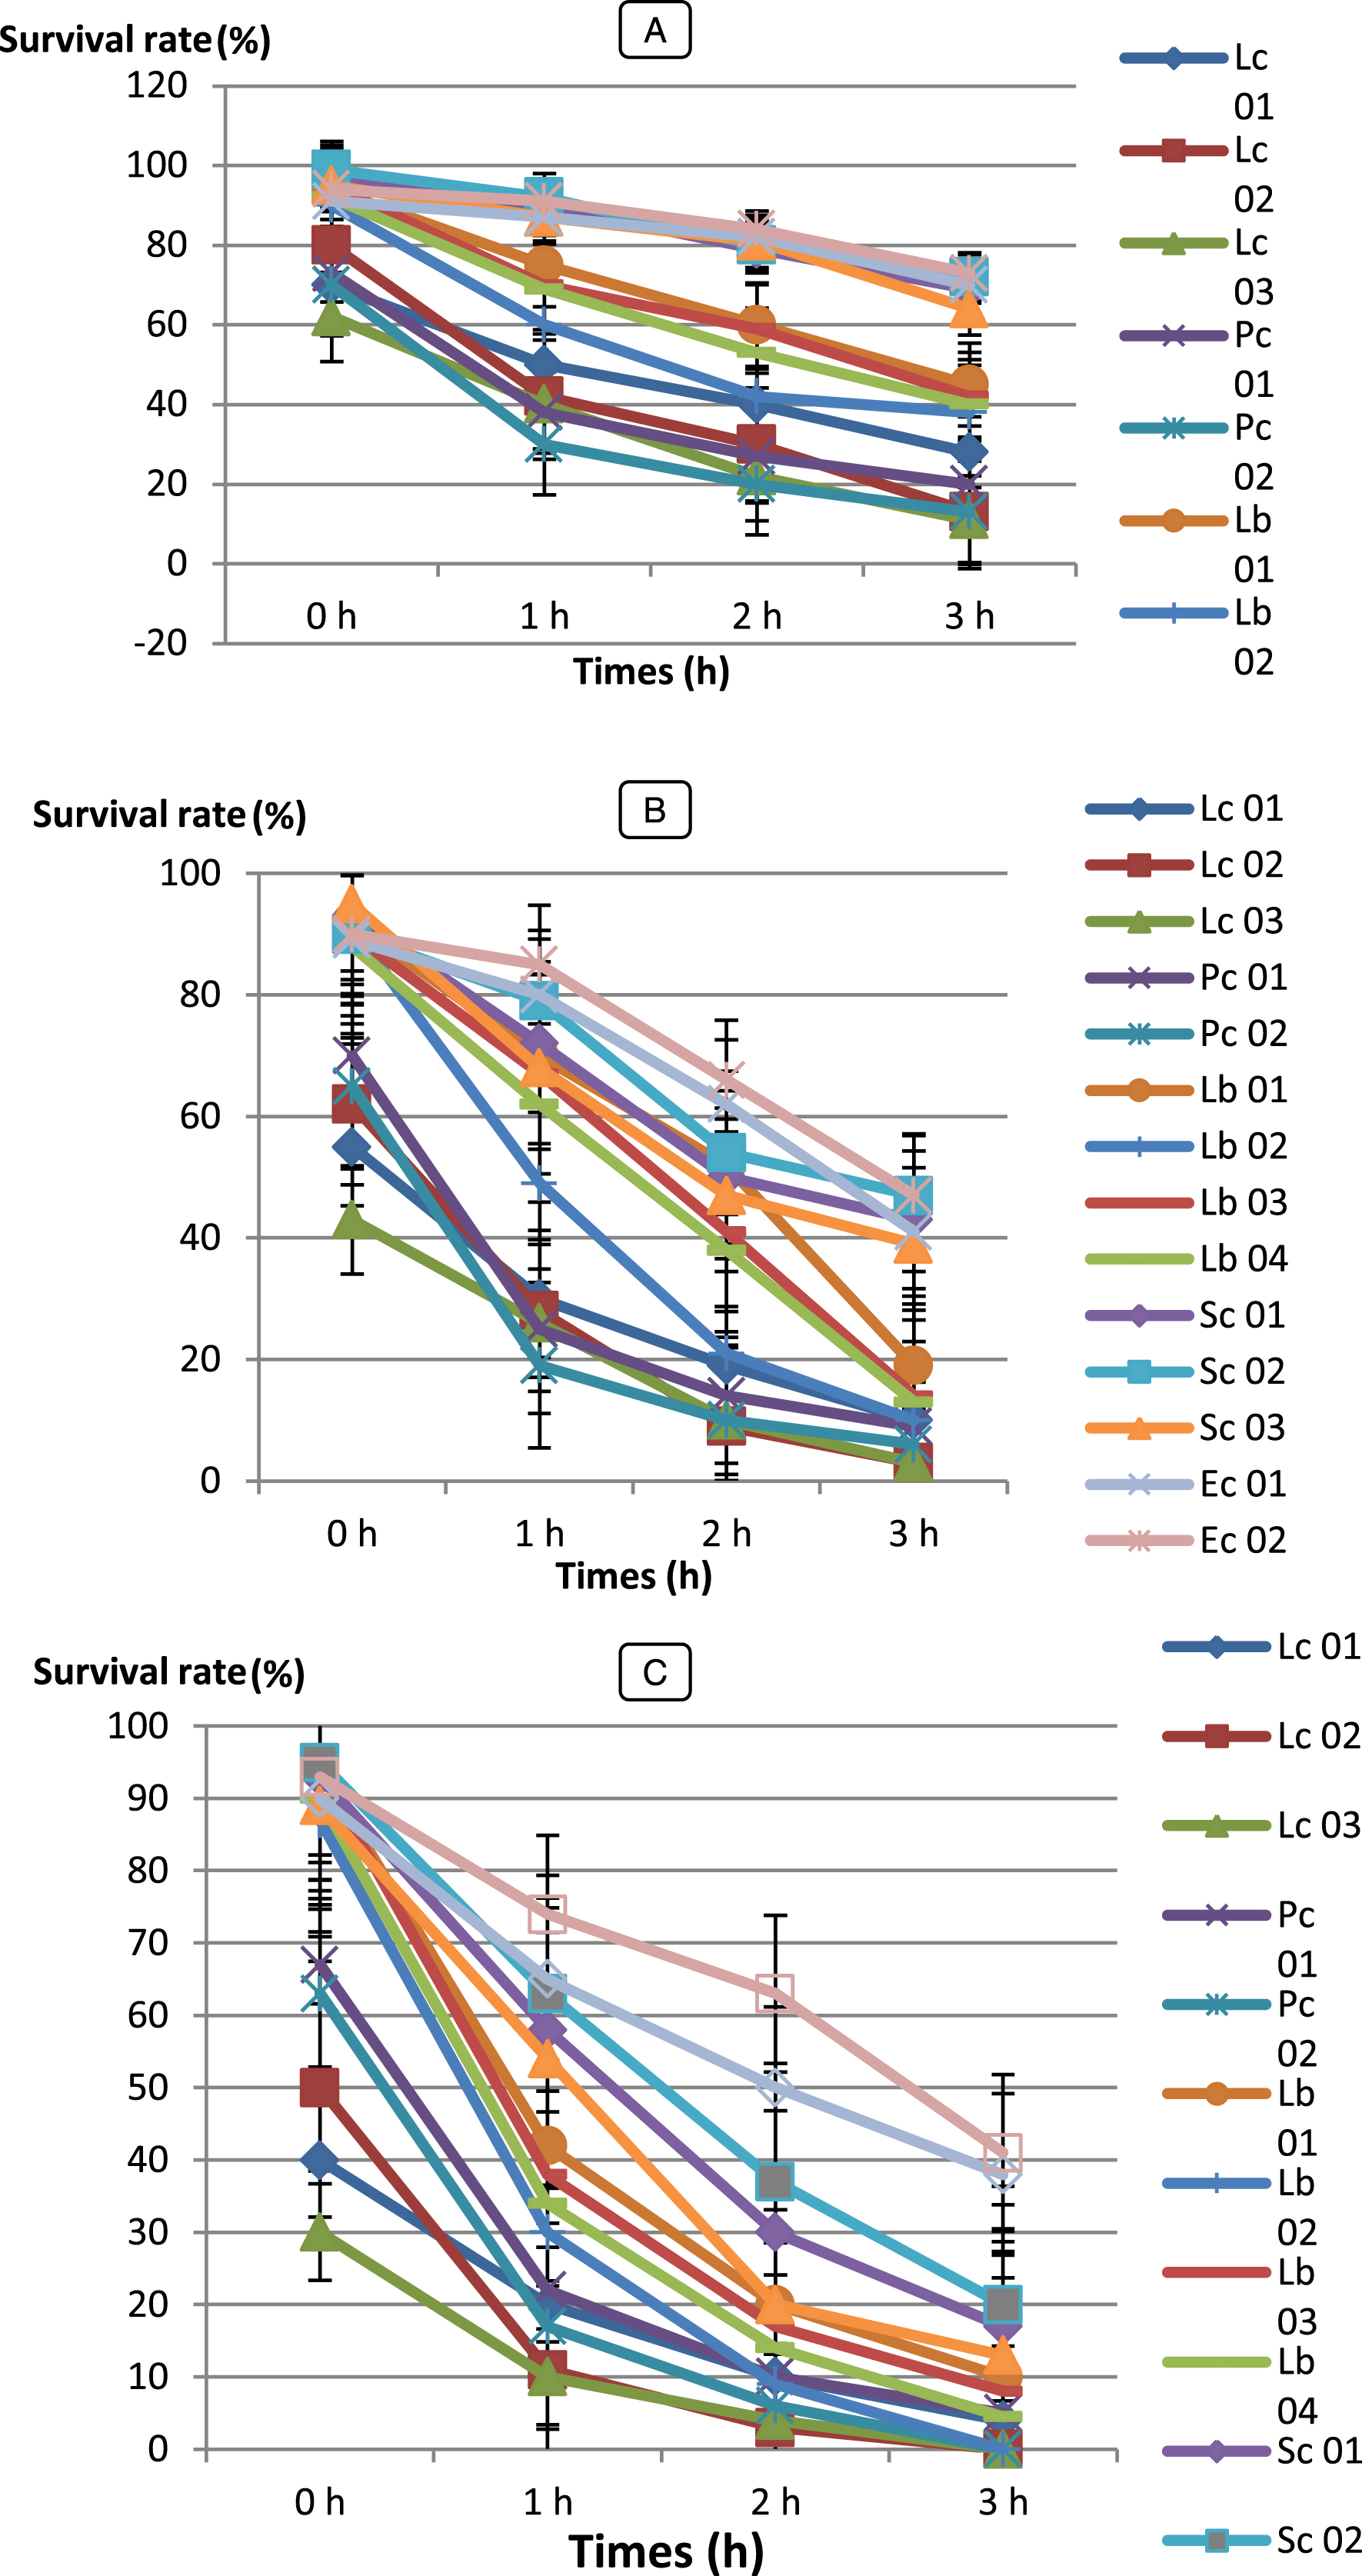 Survival rate tolerance at 0,3 % (A), 0,5 % (B), 01 % (C) of bile Salts of LAB strains (♦) Lc. lactis (Lc 01), (■) Lc 02, (▴) Lc 03, (◊), (×) Pc 01, (*) Pc 02, (•) Lb 01, () Lb 02, (+) Lb 03, (–) Lb 04, () Sc 01, () Sc 02, (◊) Ec 01, (□) Ec 02. Error bars show the SD of the mean of triplicate analyses.